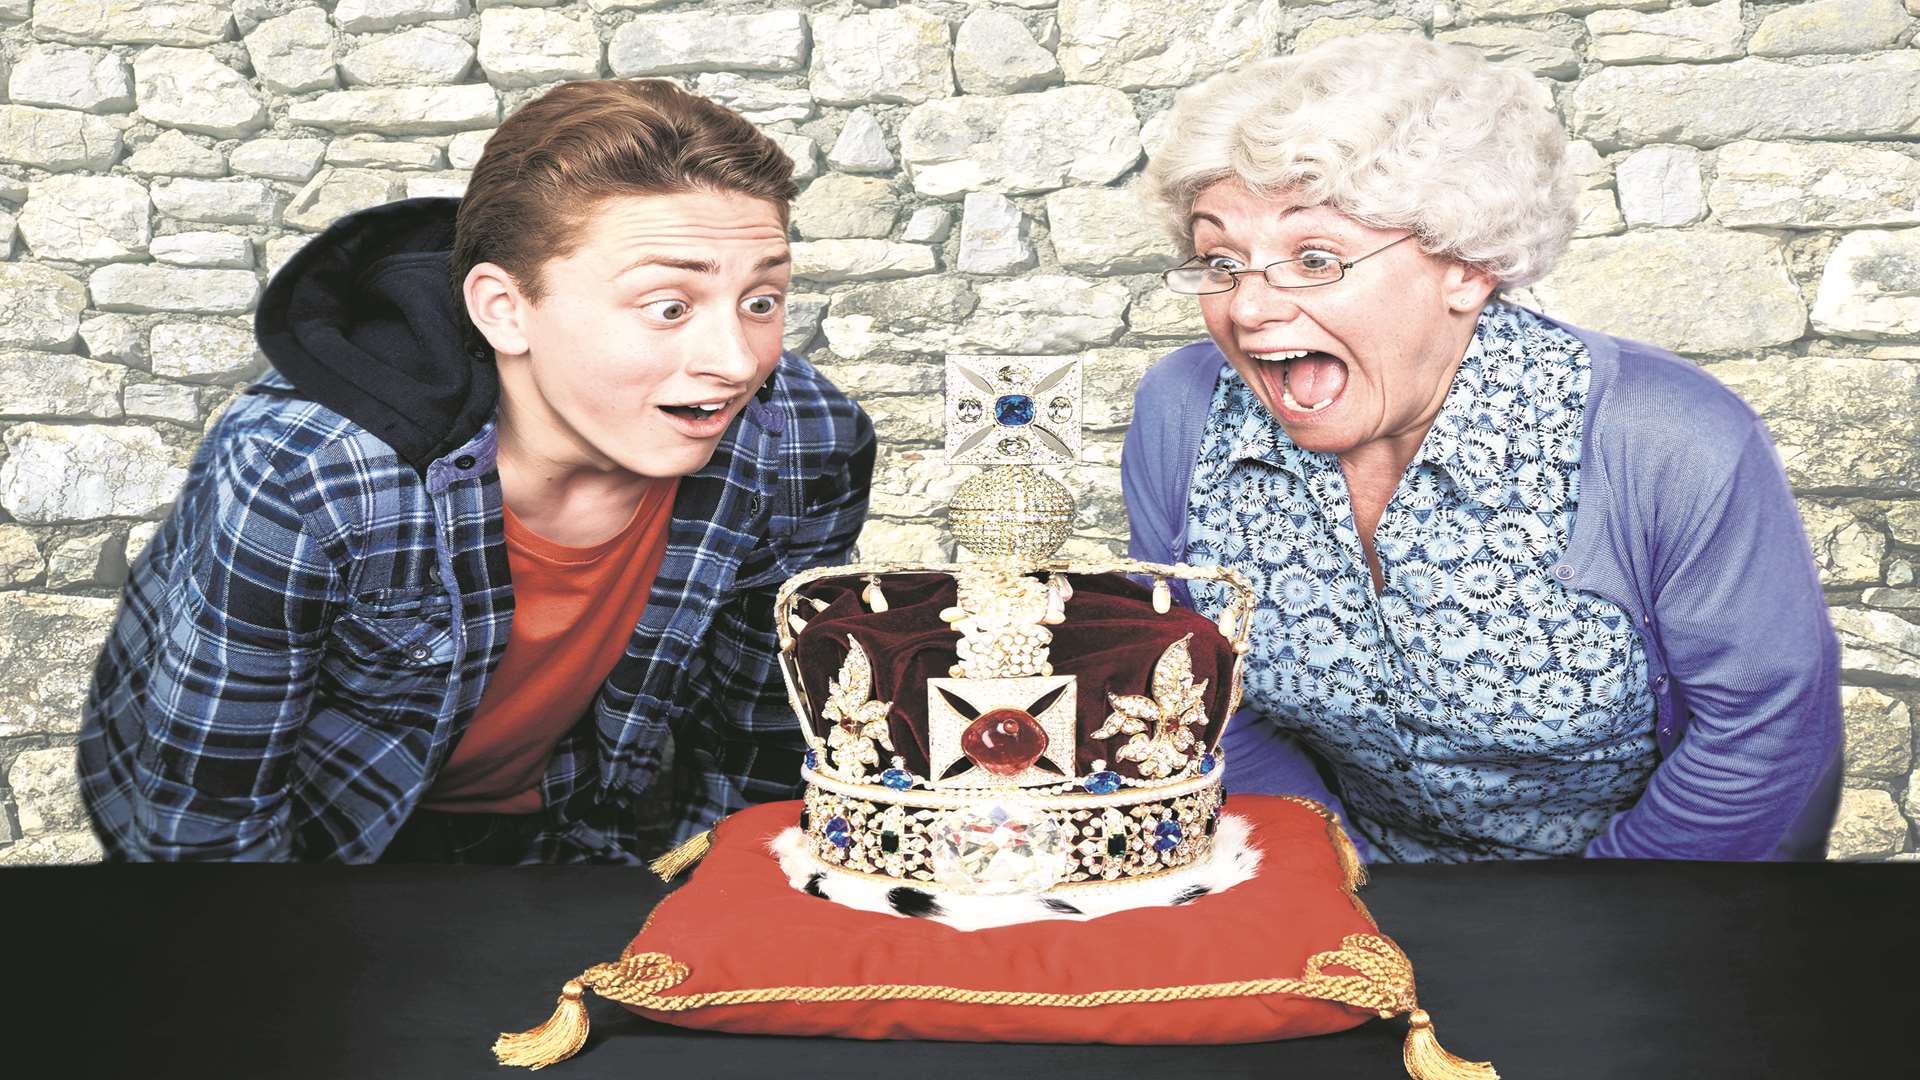 David Walliams' book has been turned into a stage show